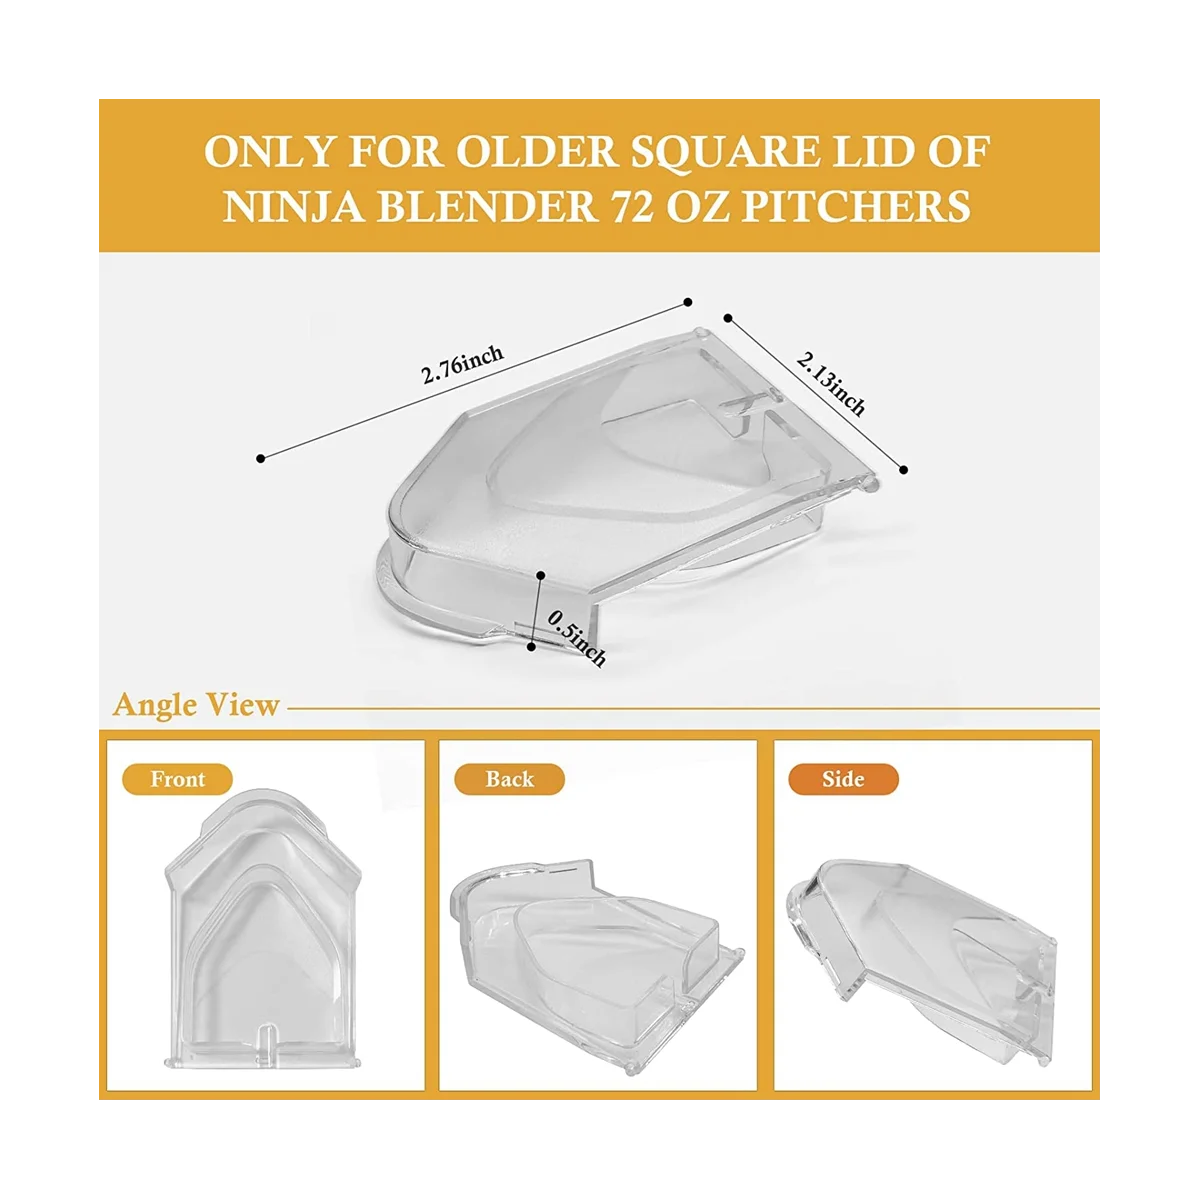 2Pcs Spout Cover for Ninja Blender Lid, Replacement Parts for Ninja Blender 72Oz Pitcher Lid Flap Spout Cover, Clear